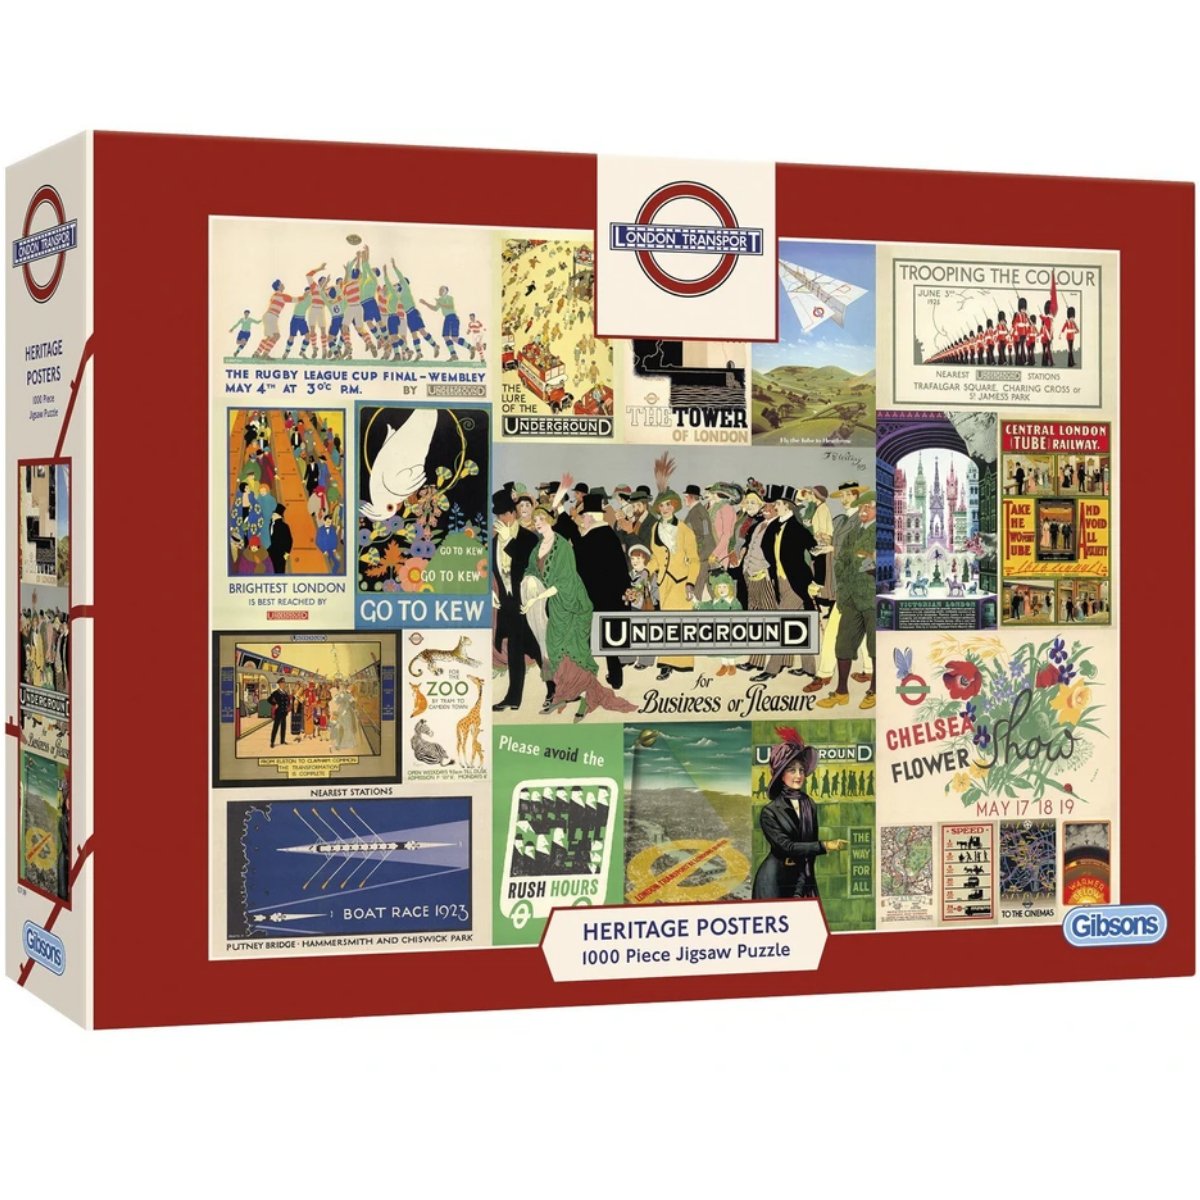 Gibsons Transport for London Heritage Posters Jigsaw Puzzle (1000 Pieces)